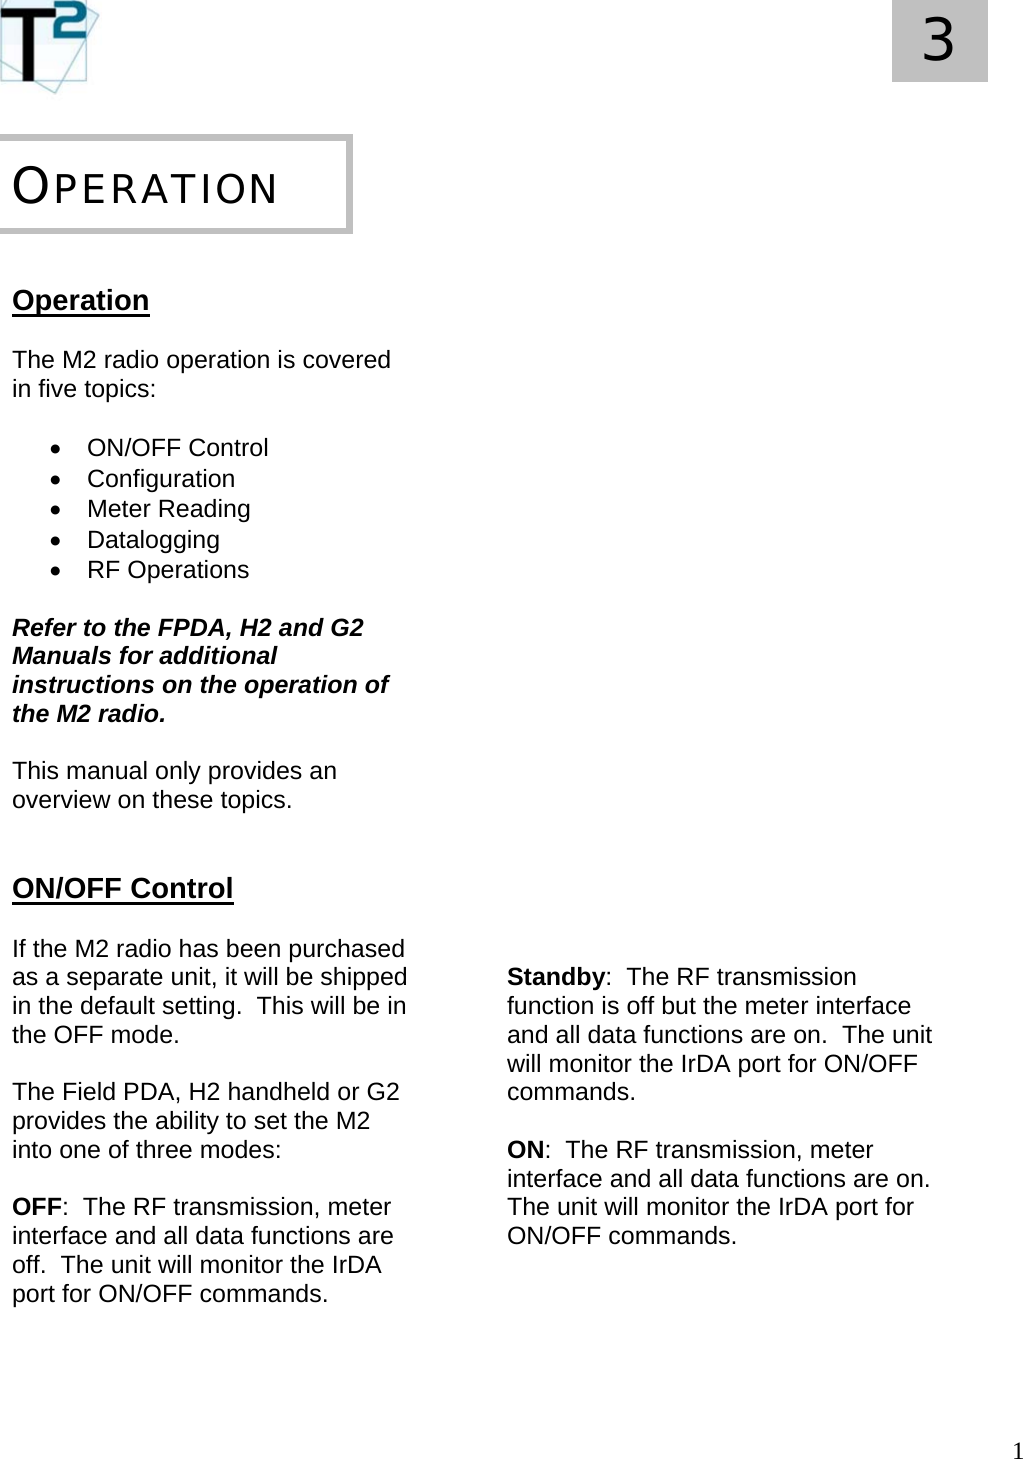   1 3       Operation  The M2 radio operation is covered in five topics:  • ON/OFF Control • Configuration • Meter Reading • Datalogging • RF Operations  Refer to the FPDA, H2 and G2 Manuals for additional instructions on the operation of the M2 radio.  This manual only provides an overview on these topics.   ON/OFF Control  If the M2 radio has been purchased as a separate unit, it will be shipped in the default setting.  This will be in the OFF mode.  The Field PDA, H2 handheld or G2 provides the ability to set the M2 into one of three modes:  OFF:  The RF transmission, meter interface and all data functions are off.  The unit will monitor the IrDA port for ON/OFF commands.     OPERATION                             Standby:  The RF transmission function is off but the meter interface and all data functions are on.  The unit will monitor the IrDA port for ON/OFF commands.  ON:  The RF transmission, meter interface and all data functions are on.  The unit will monitor the IrDA port for ON/OFF commands.      